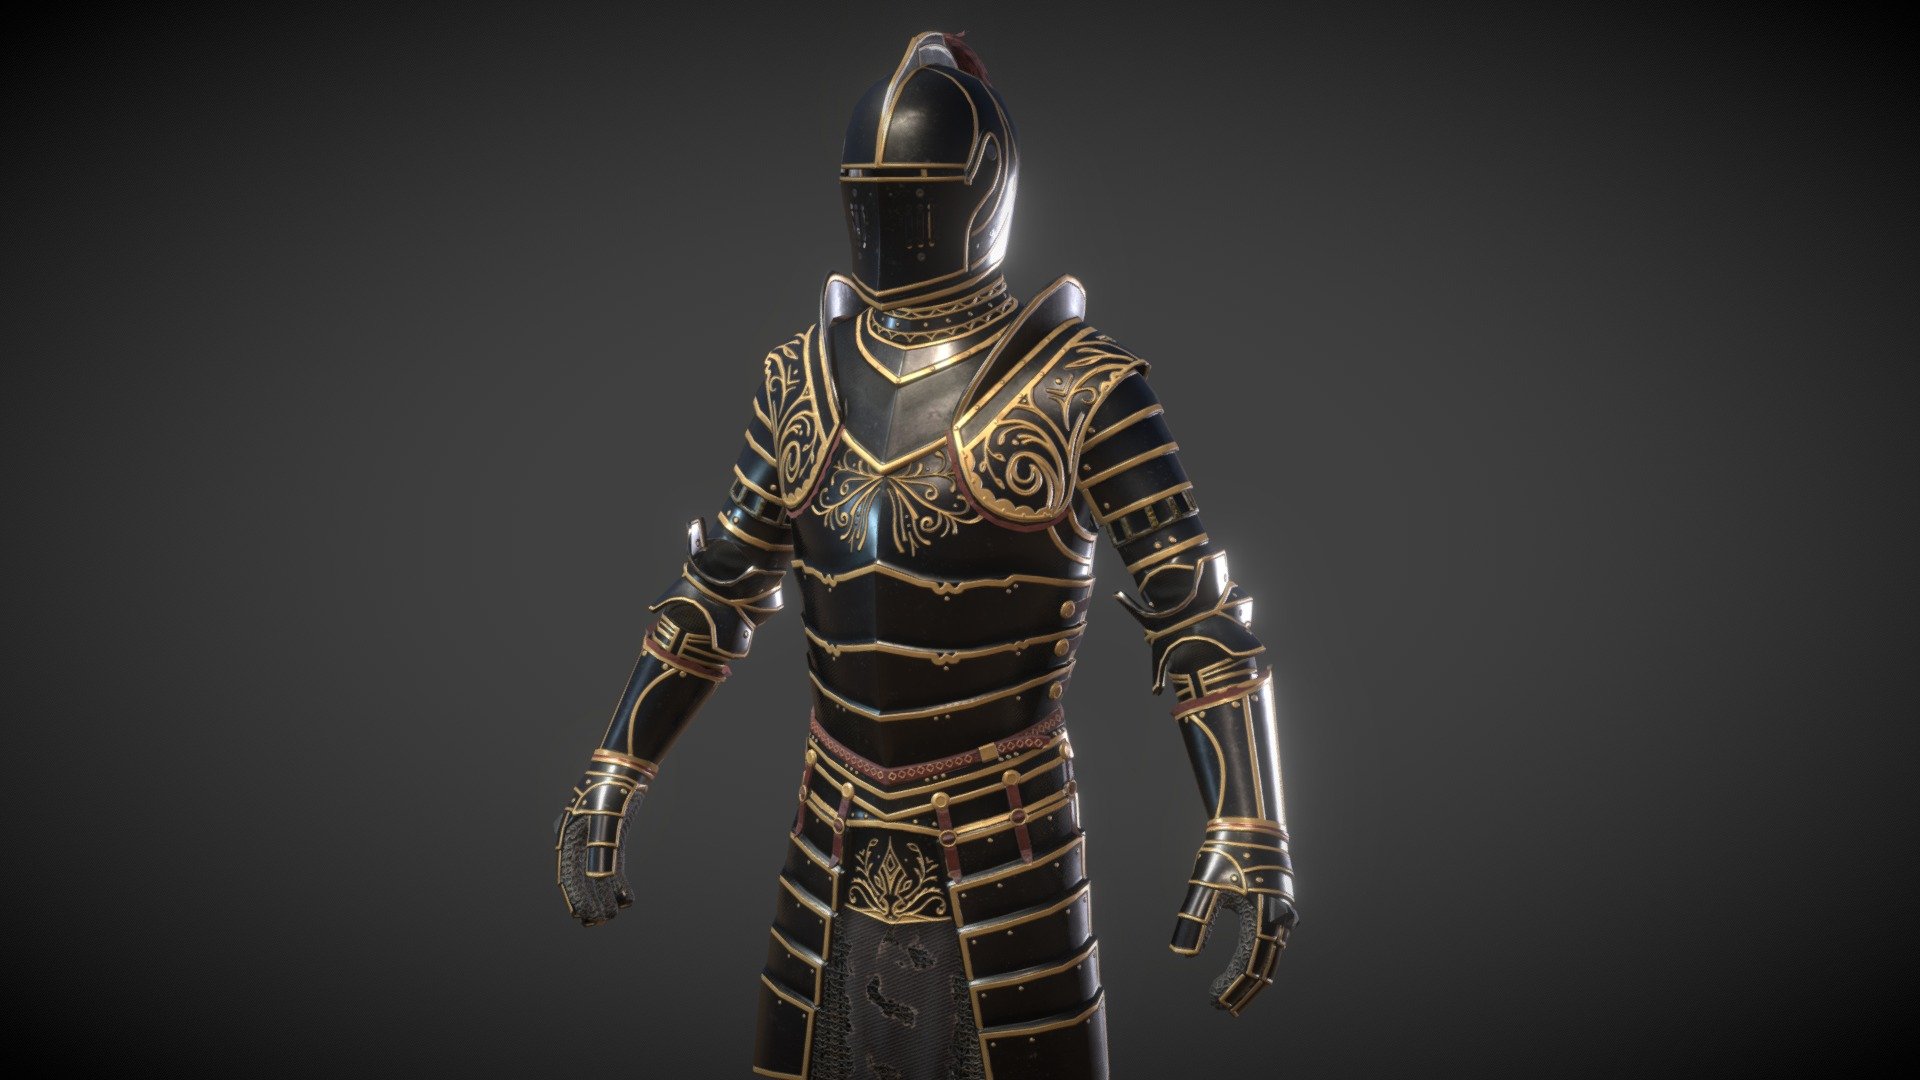 This is a remake of TES:Oblivion's iconic Ebony armor, made for the upcoming massive mod named TES:Skyblivion. Concept art by Gees. For more images and original concept art visit my Artstation page: https://www.artstation.com/artwork/EAO40
Thank you 3d model